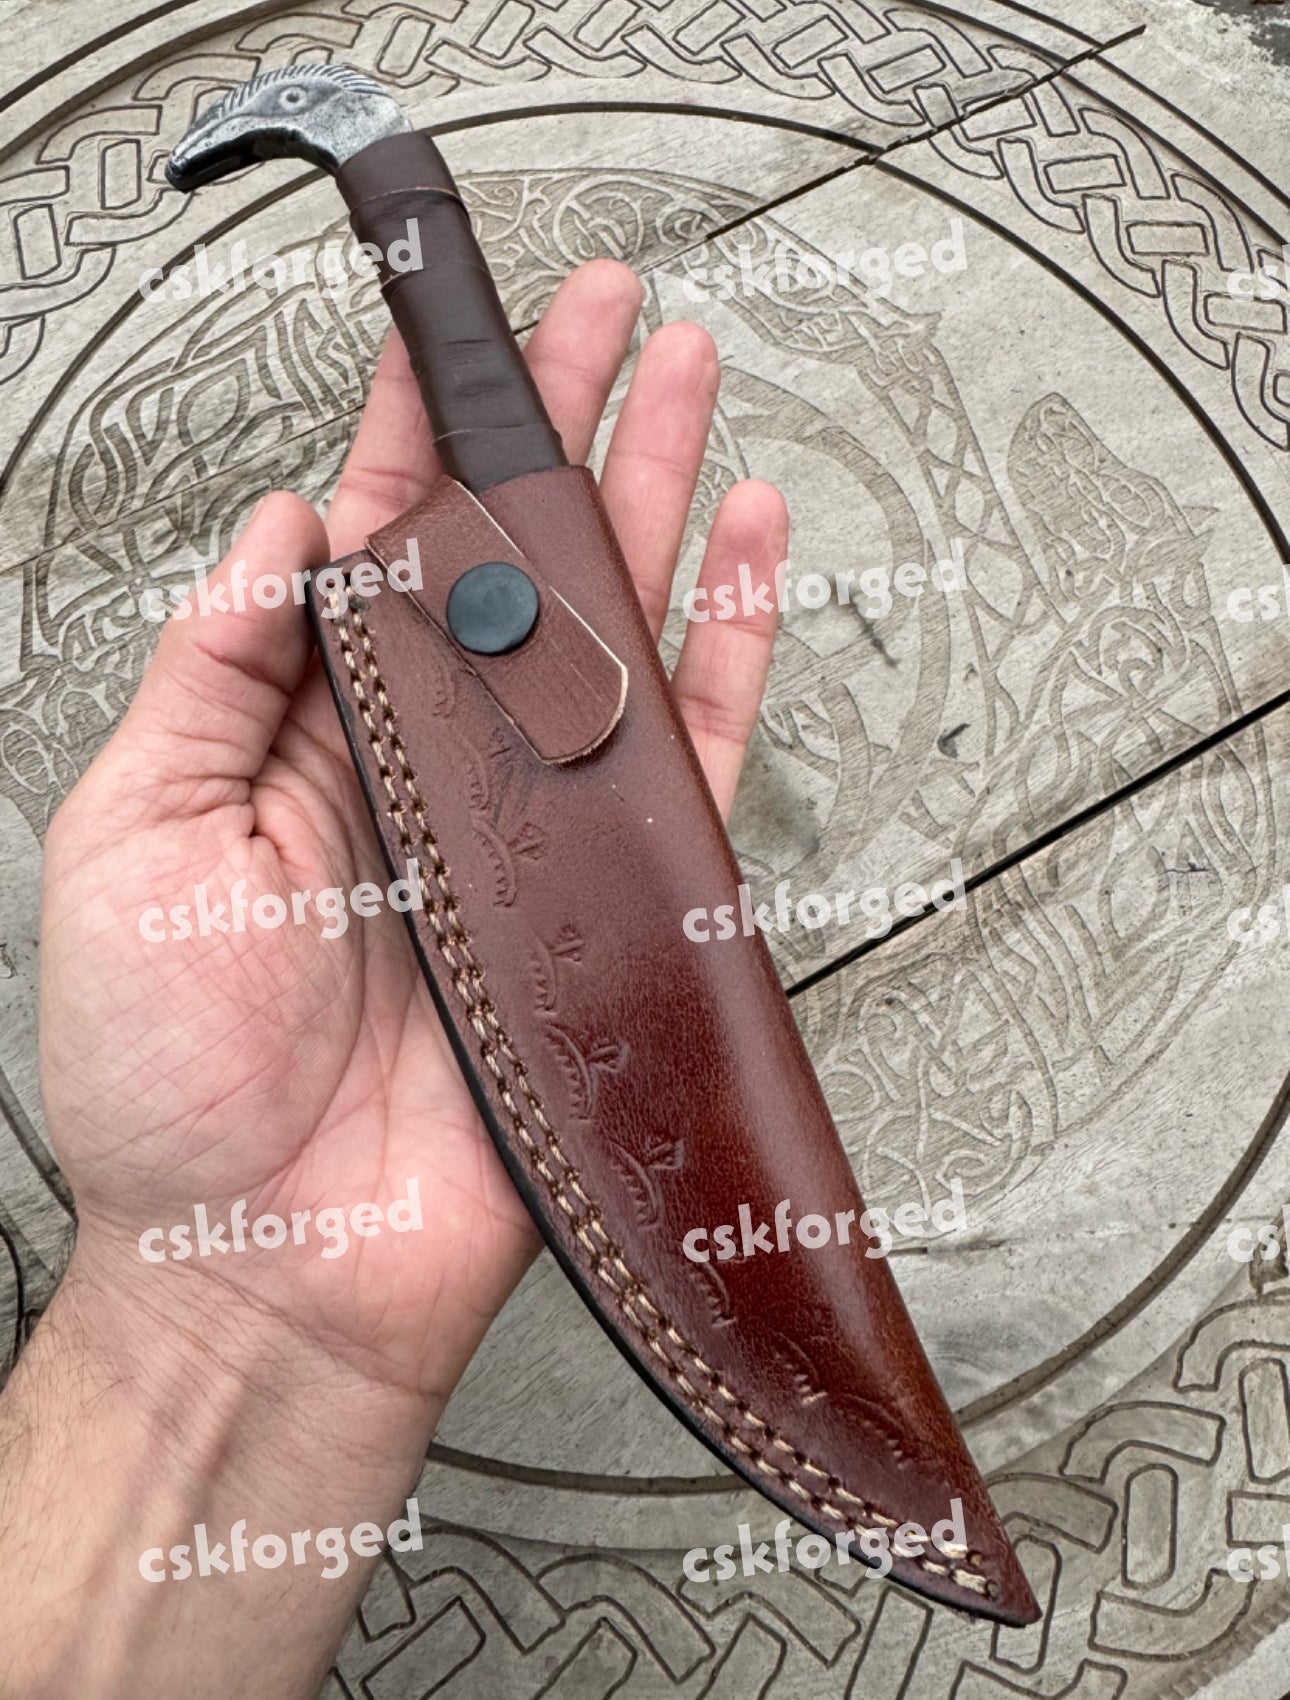 Viking Knife With Raven's Head Hilt & Leather Sheath - 5.5" Carbon Steel Sharp blade - Utility and Hunting Knife